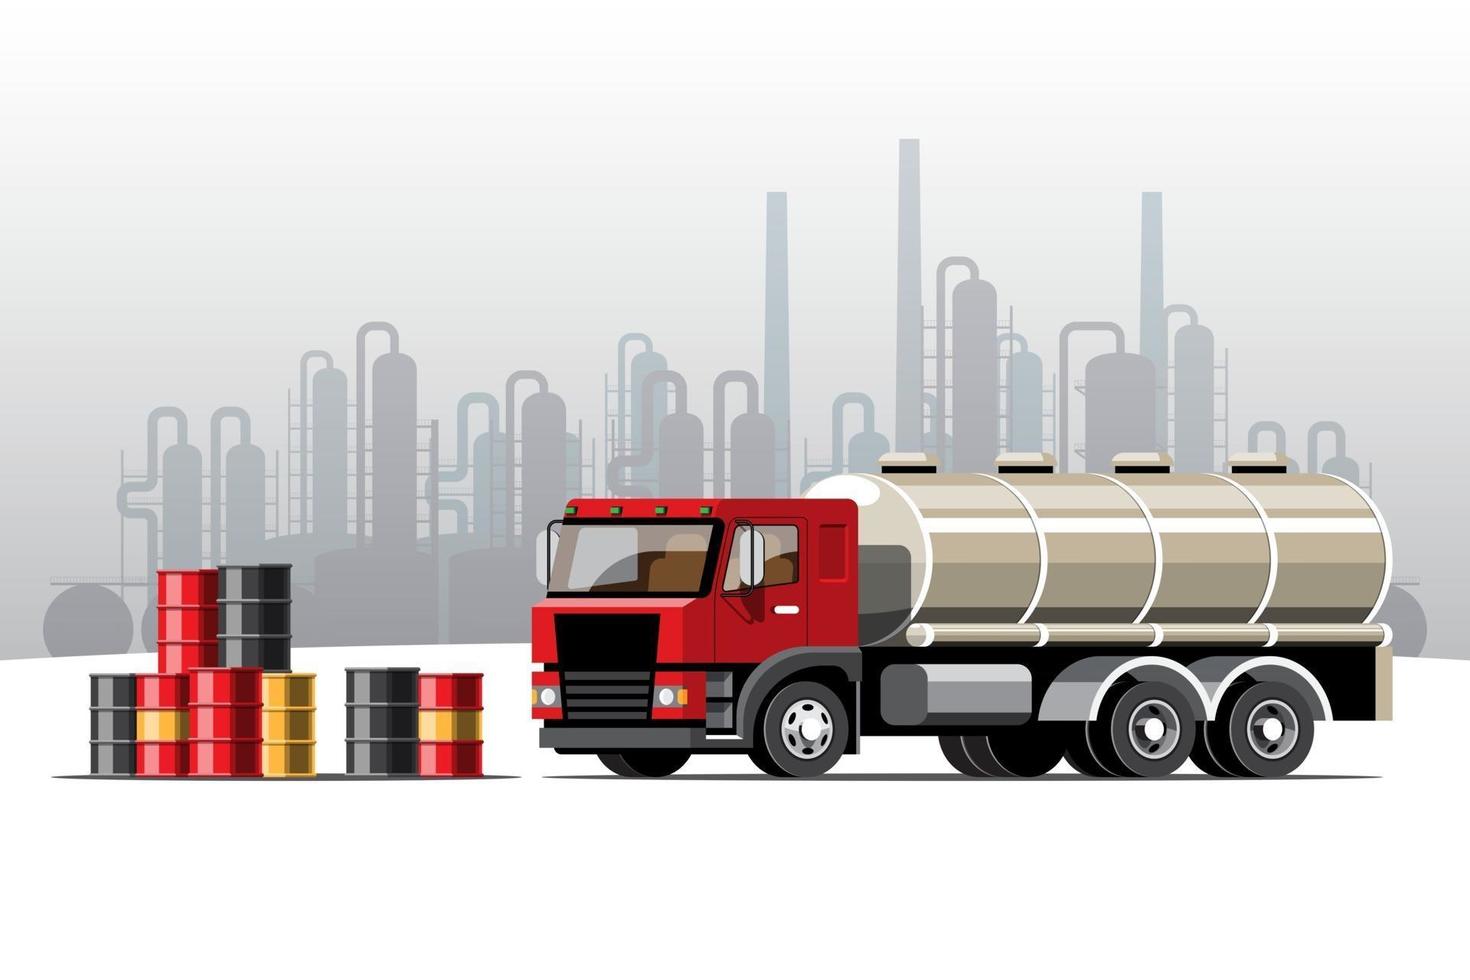 Big isolated vehicle vector colorful icons, flat illustrations of delivery by van through GPS tracking location. delivery vehicle, gas, gasoline, fuel delivery, instant delivery, online delivery.